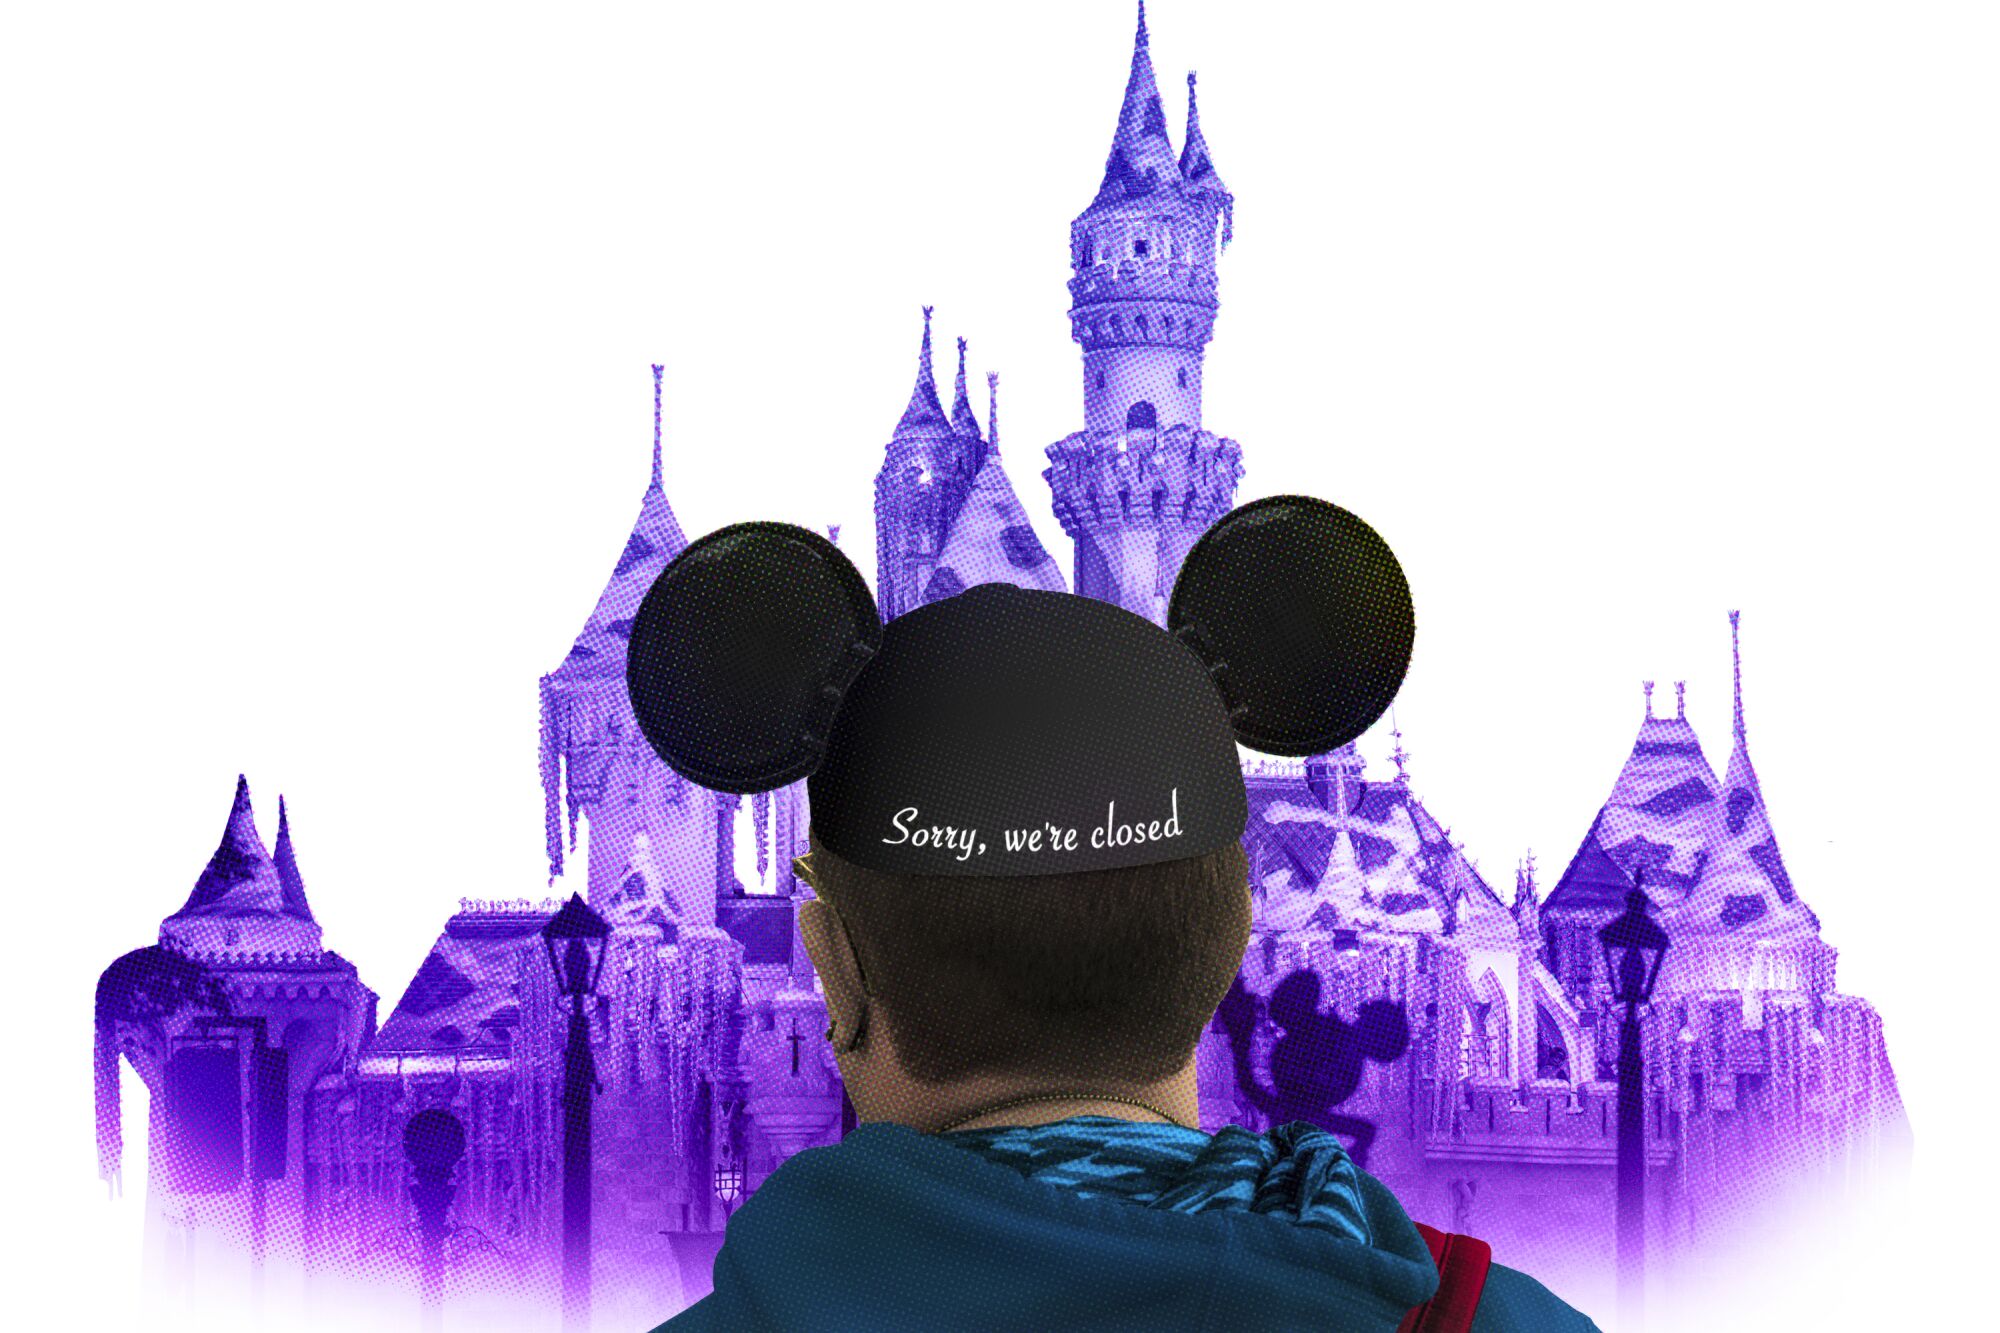 A photo illustration shows the back of a mouse-ears cap with "Sorry, we're closed" stitched on it. 